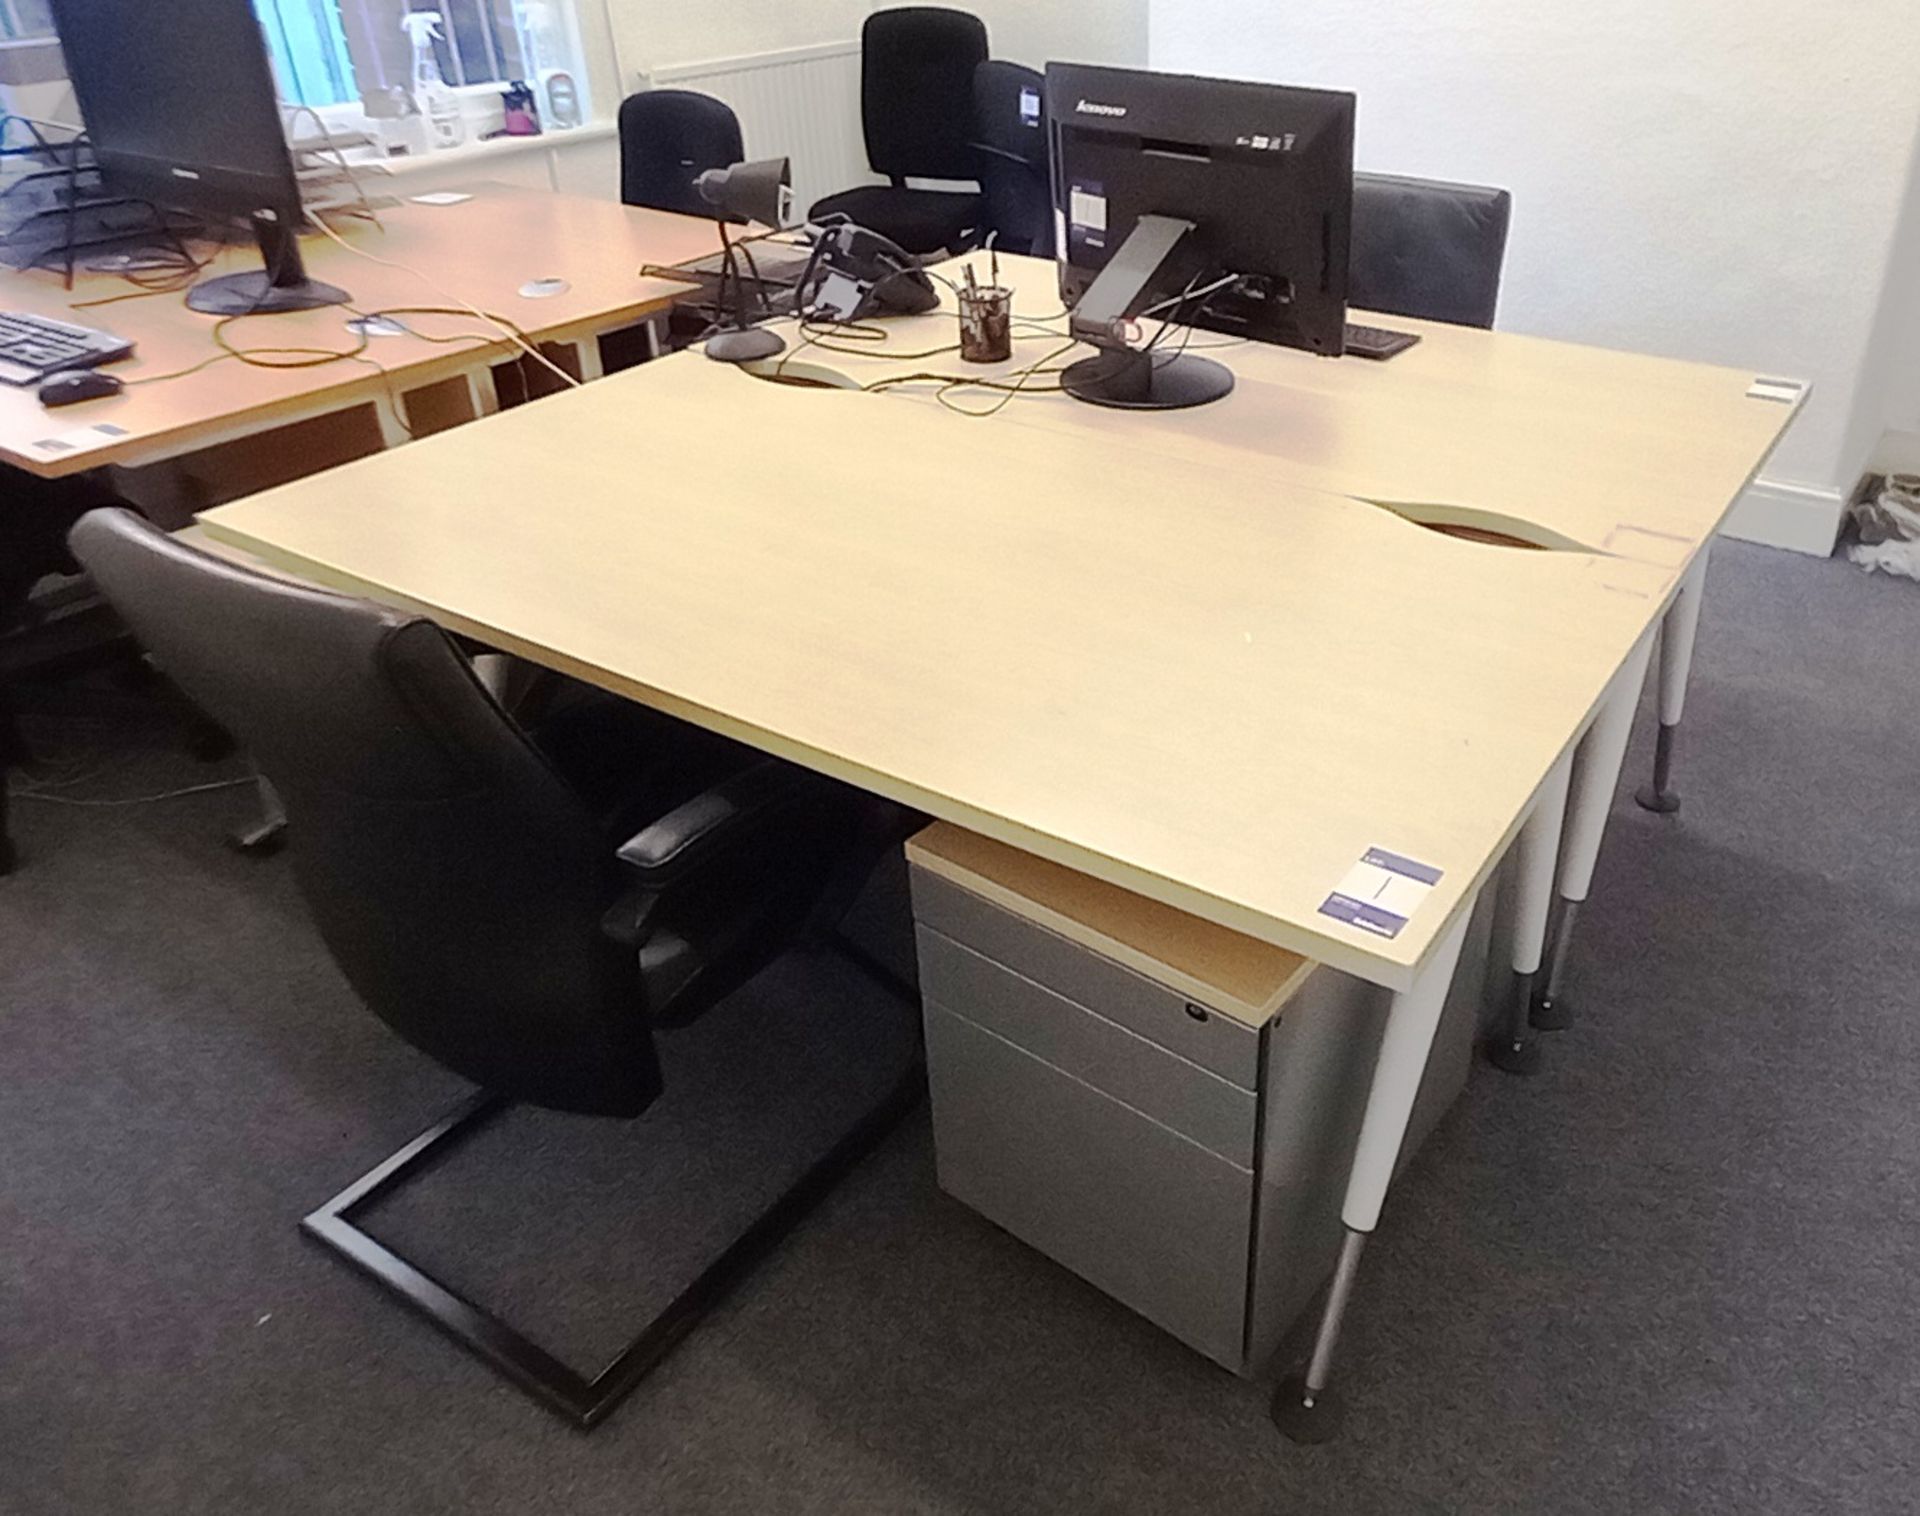 2x Contemporary office desks (1600x800), 2x cantilever leather chairs, 2x mobile pedestals and an - Image 2 of 3